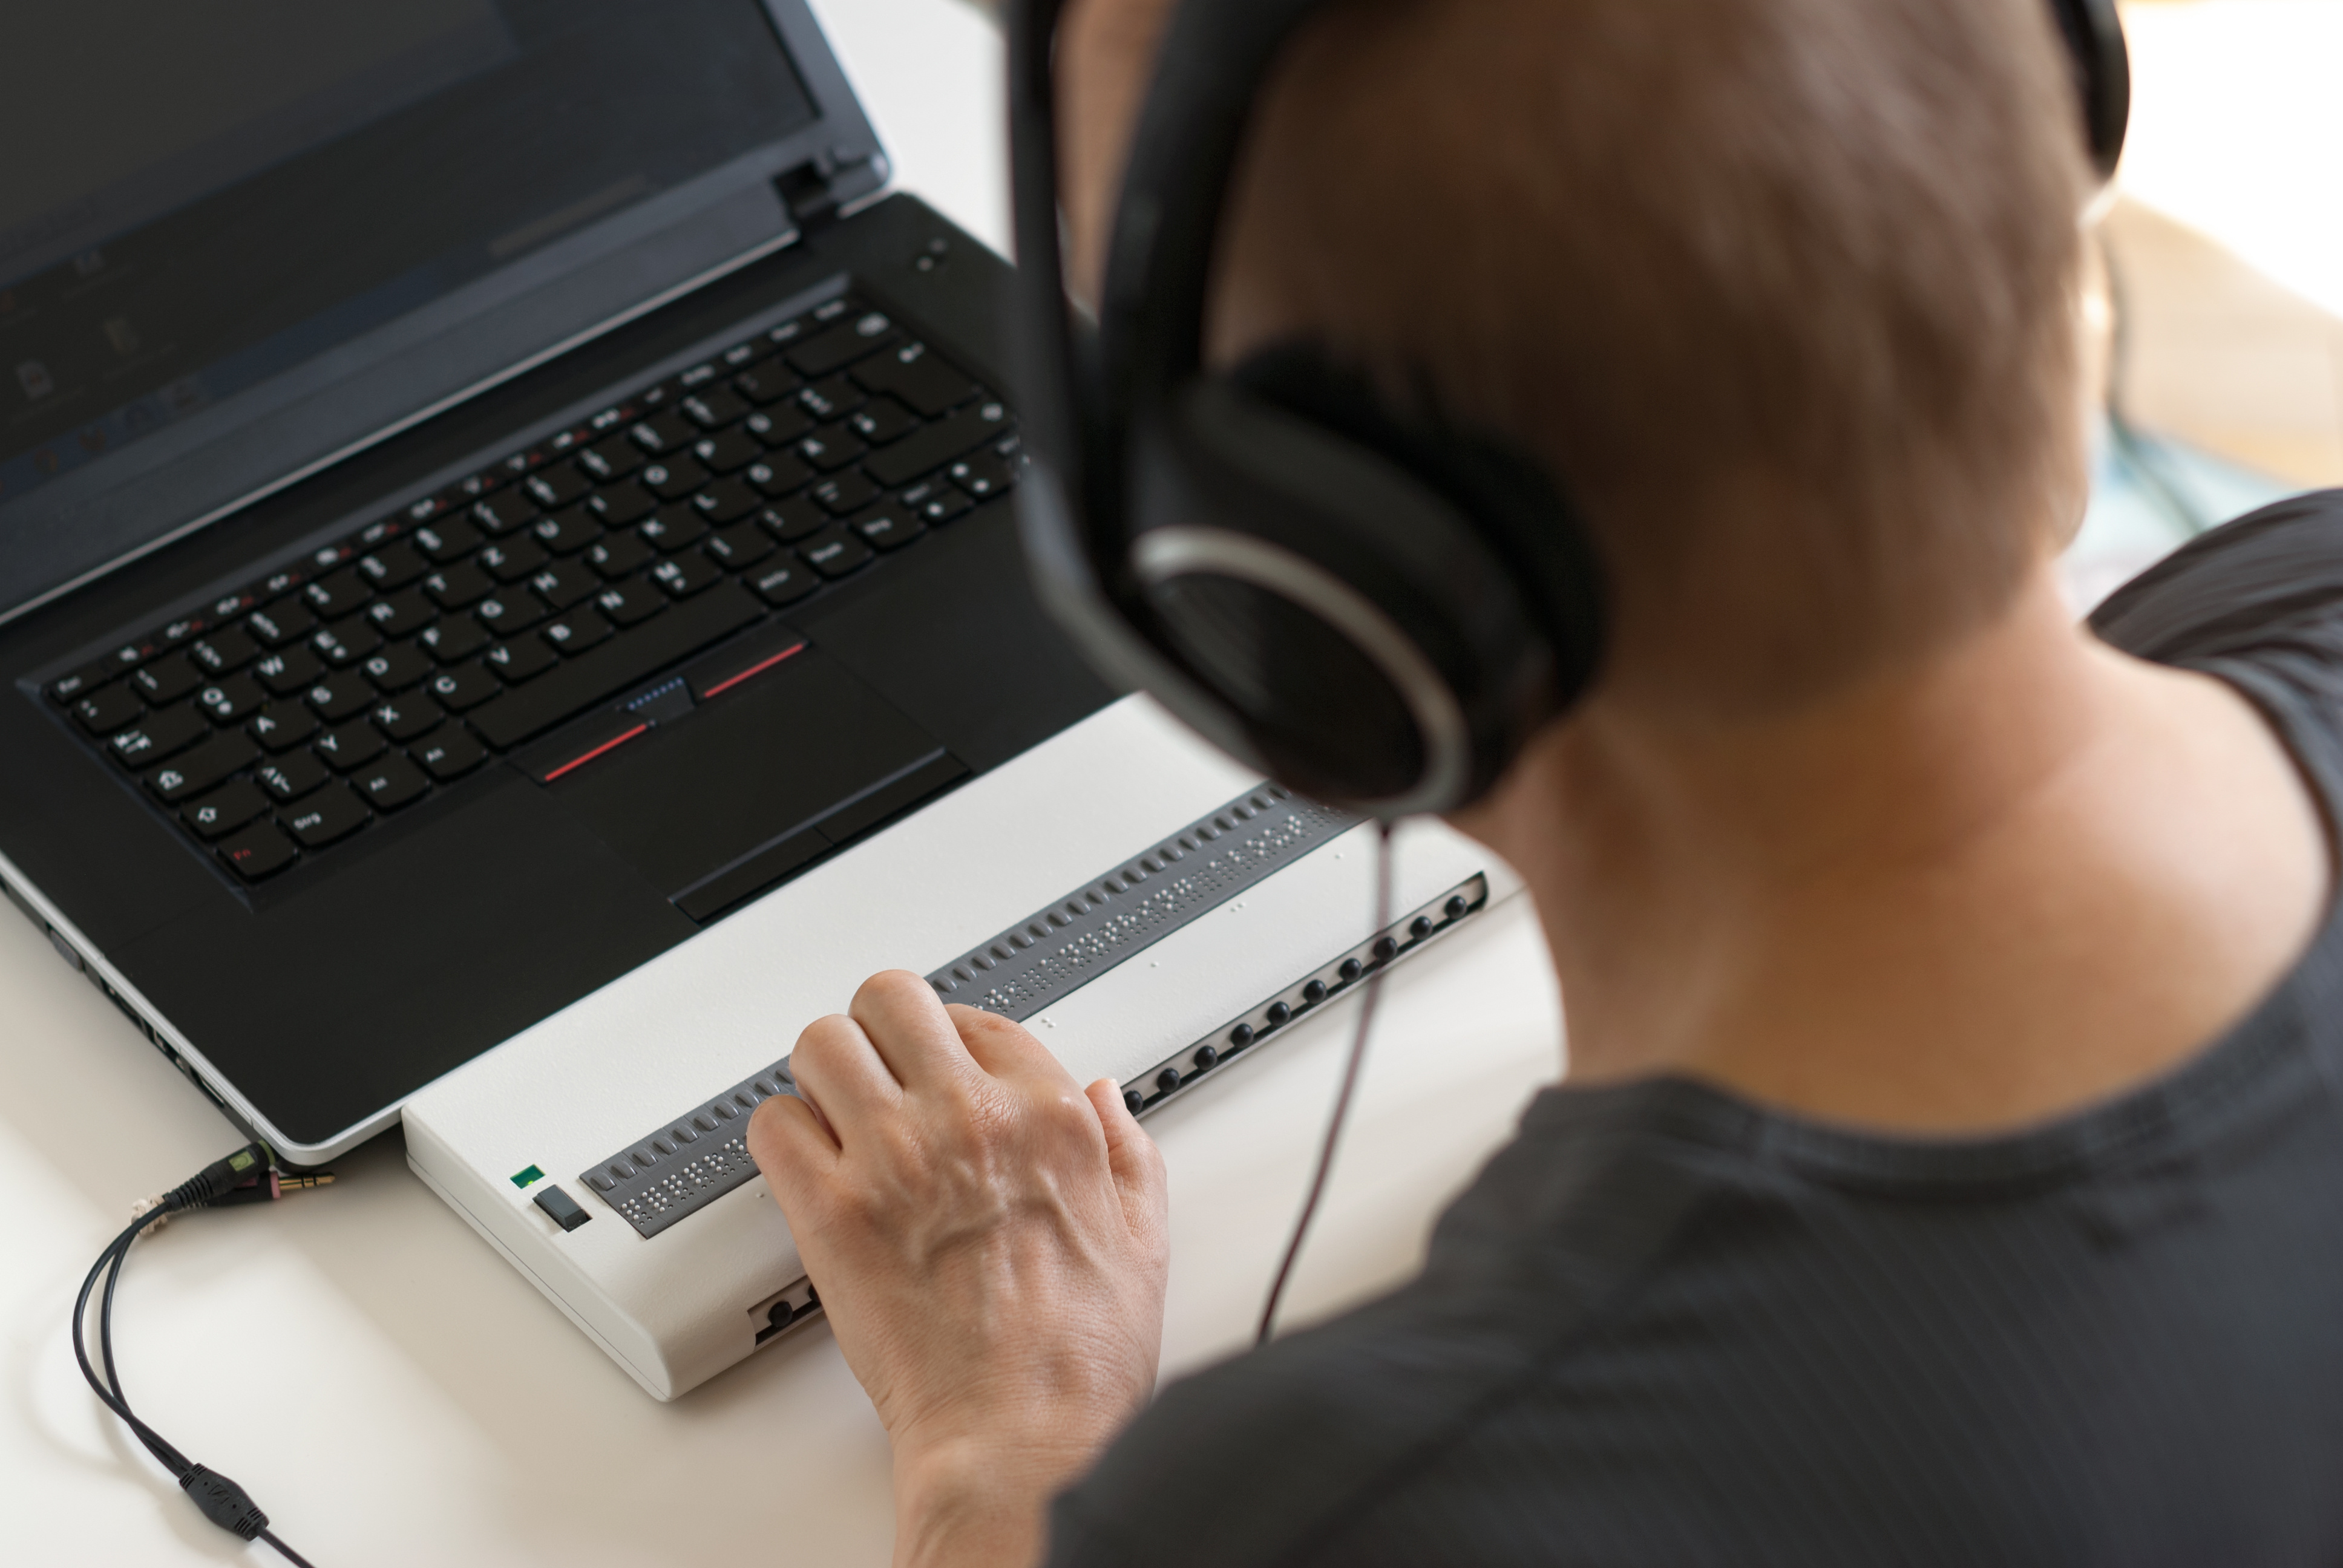 Vision impaired user uses a braille computer keyboard.